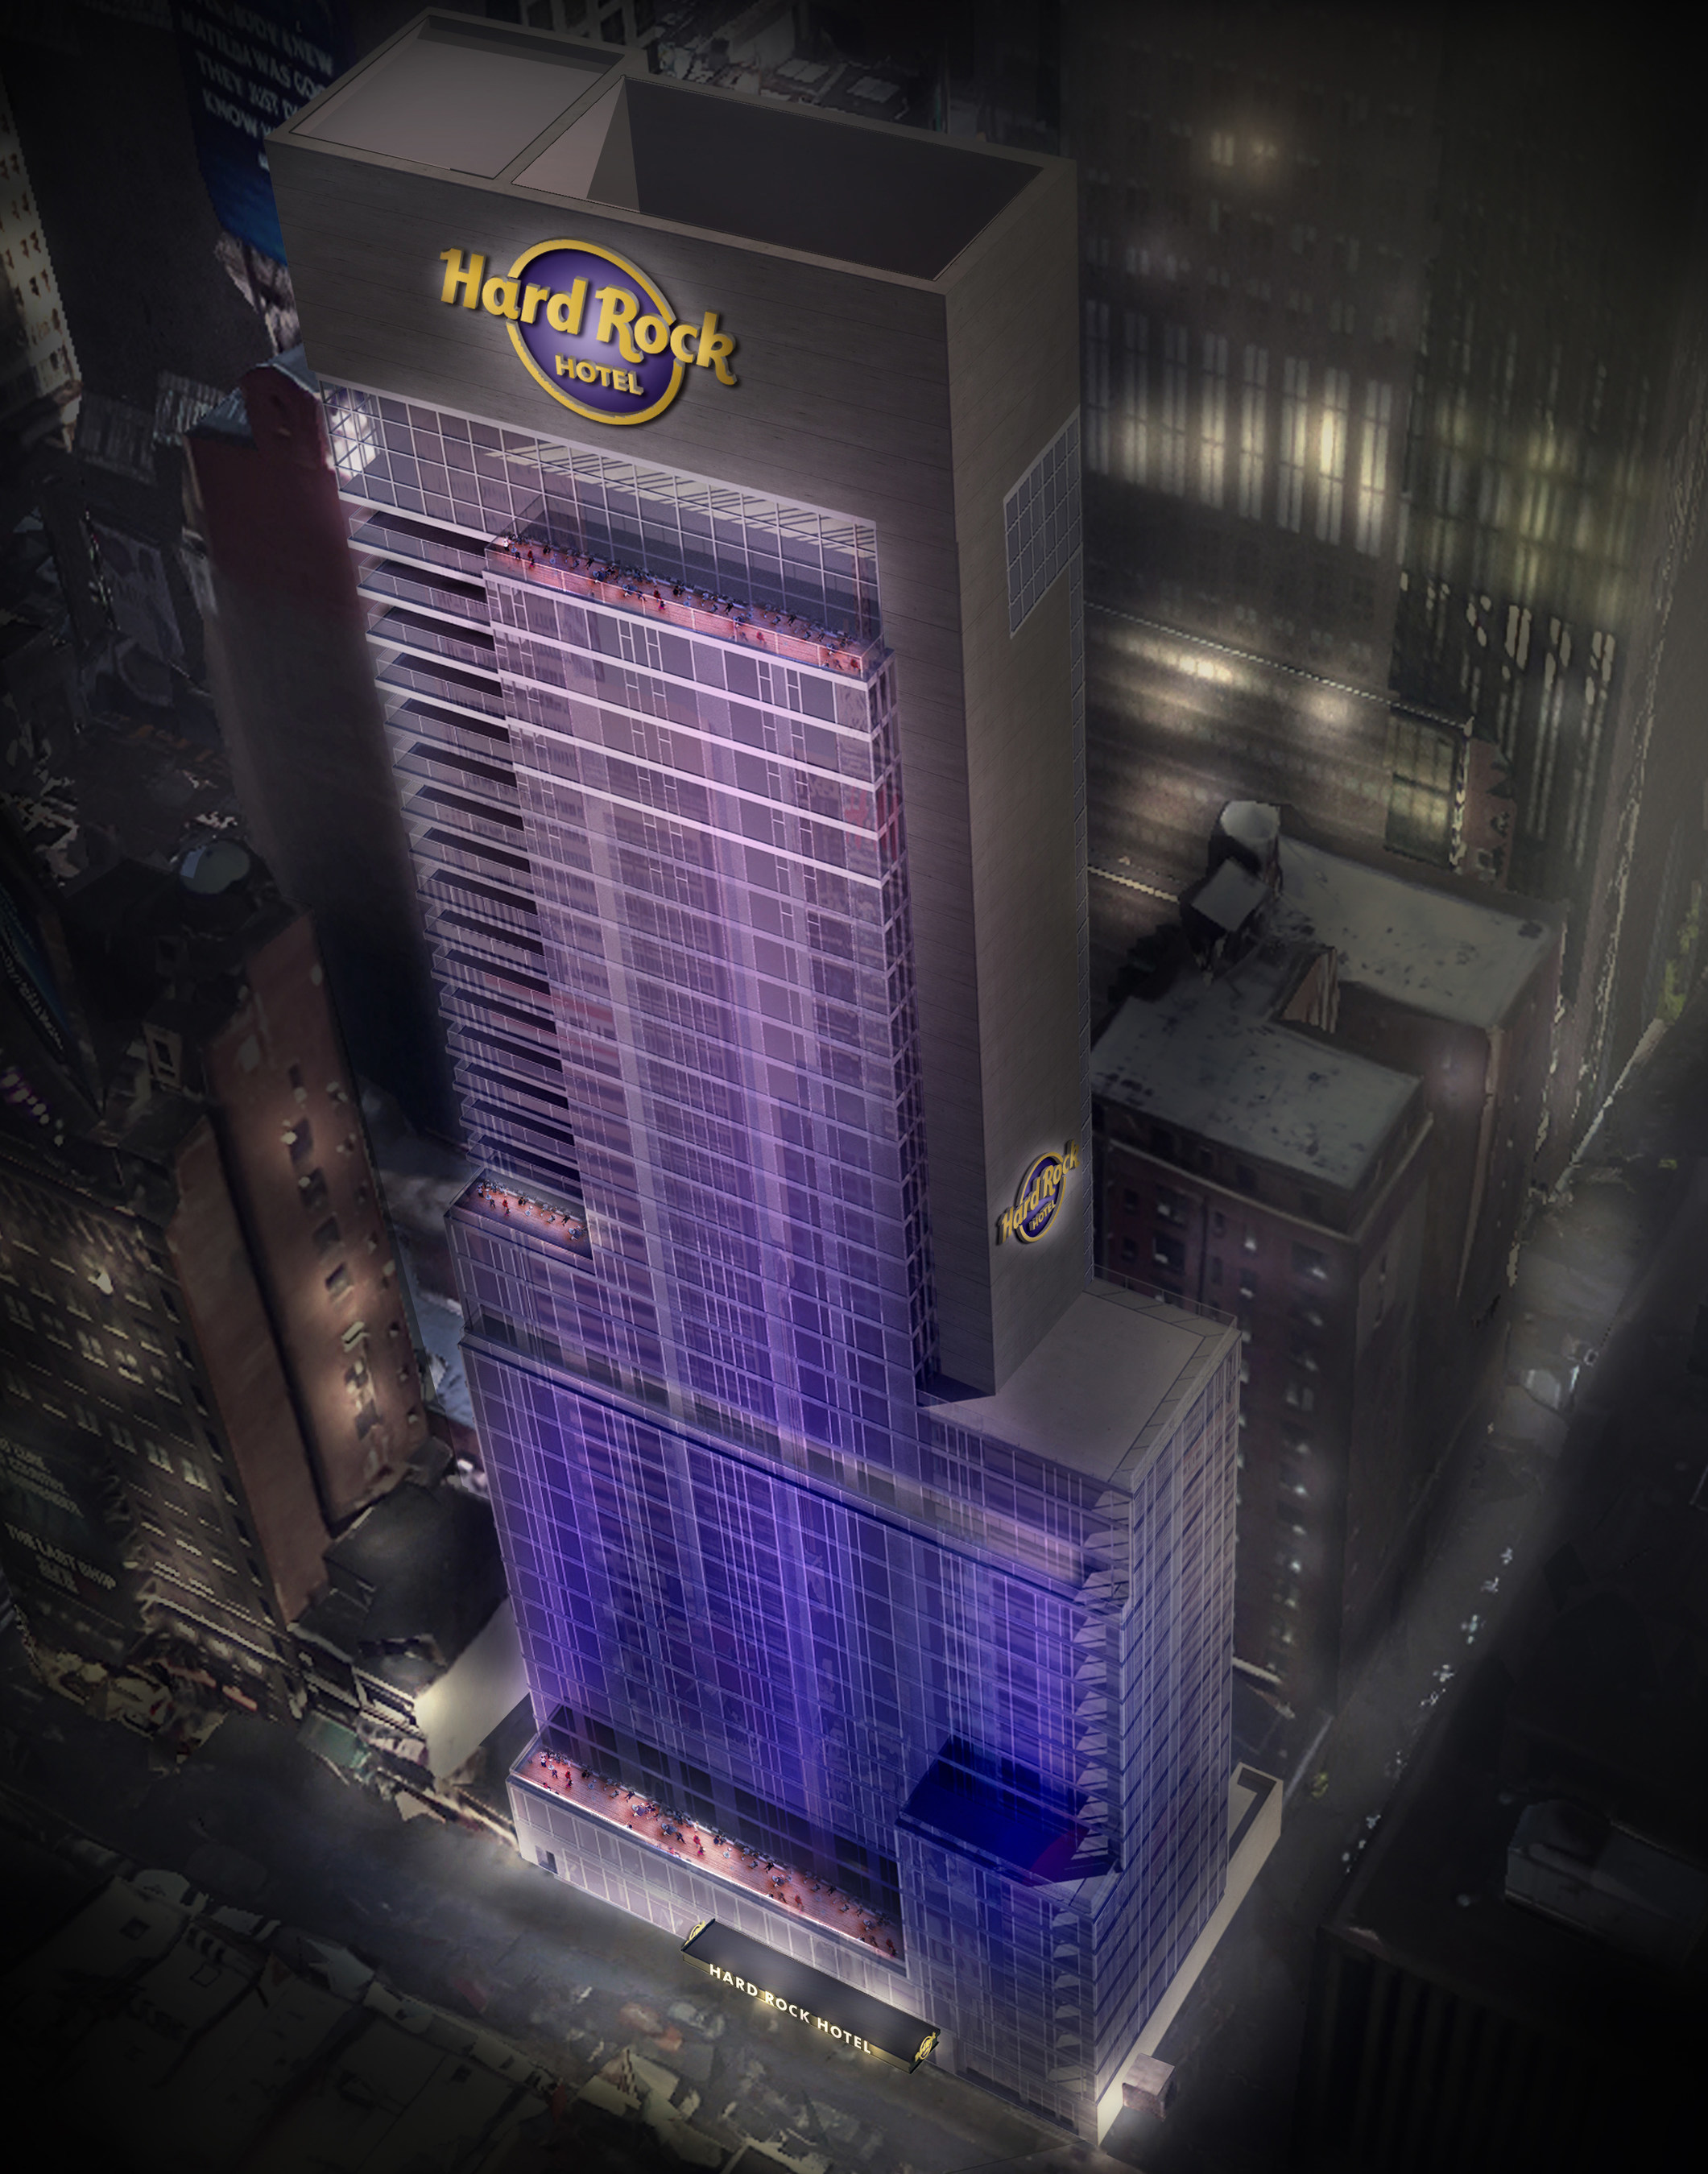 First Look: Official Rendering of Hard Rock Hotel New York